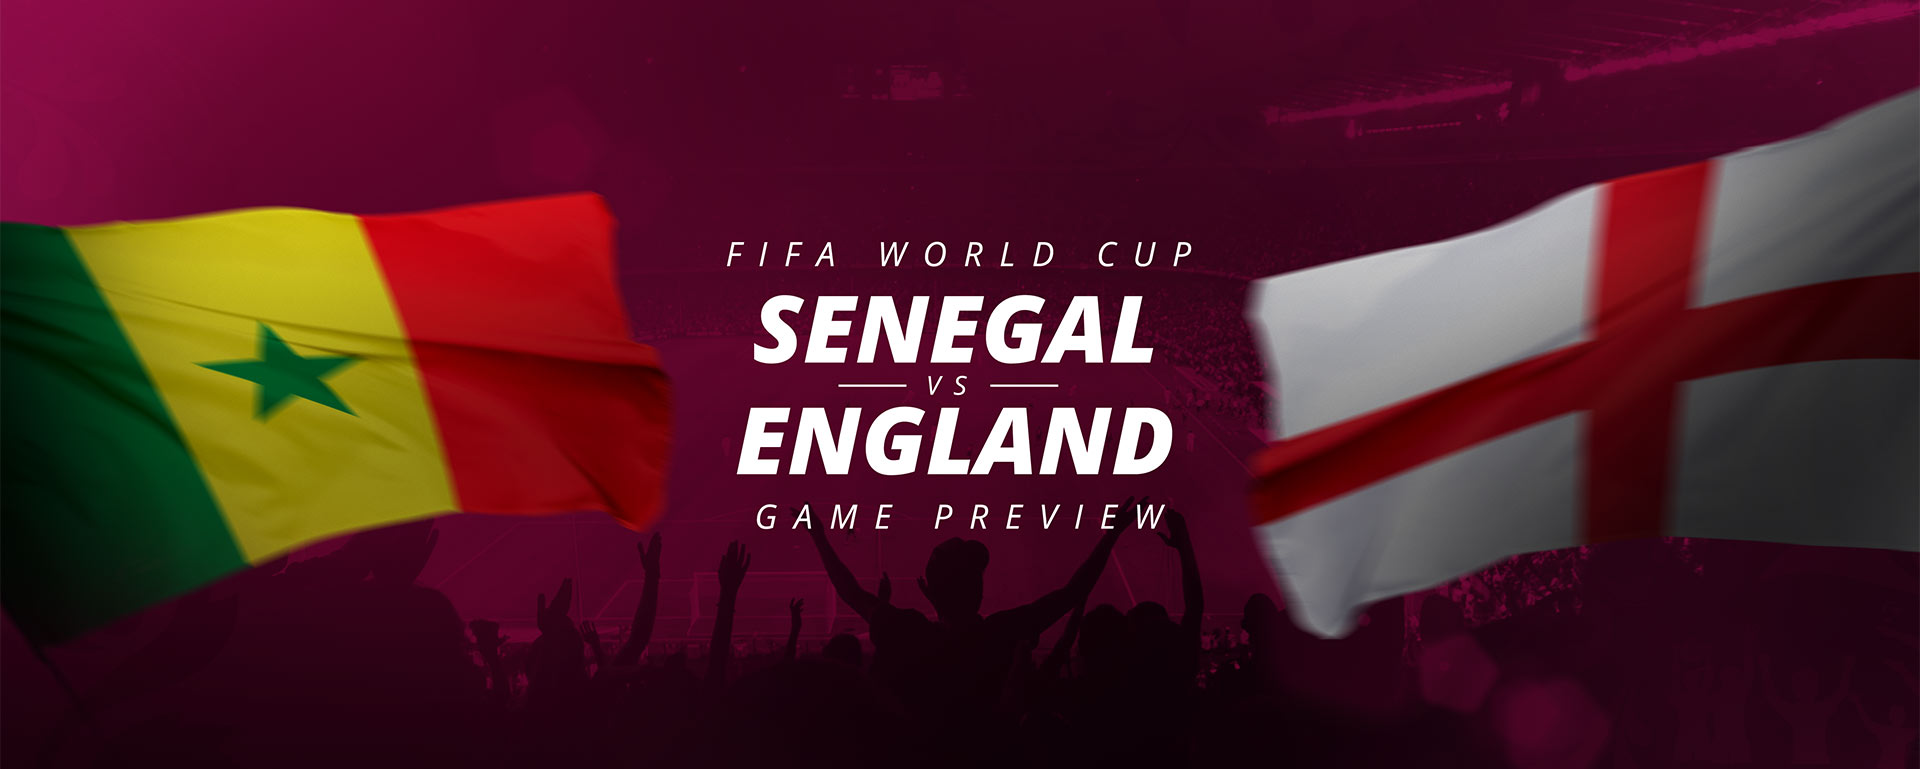 FIFA WORLD CUP: SENEGAL V ENGLAND – GAME PREVIEW